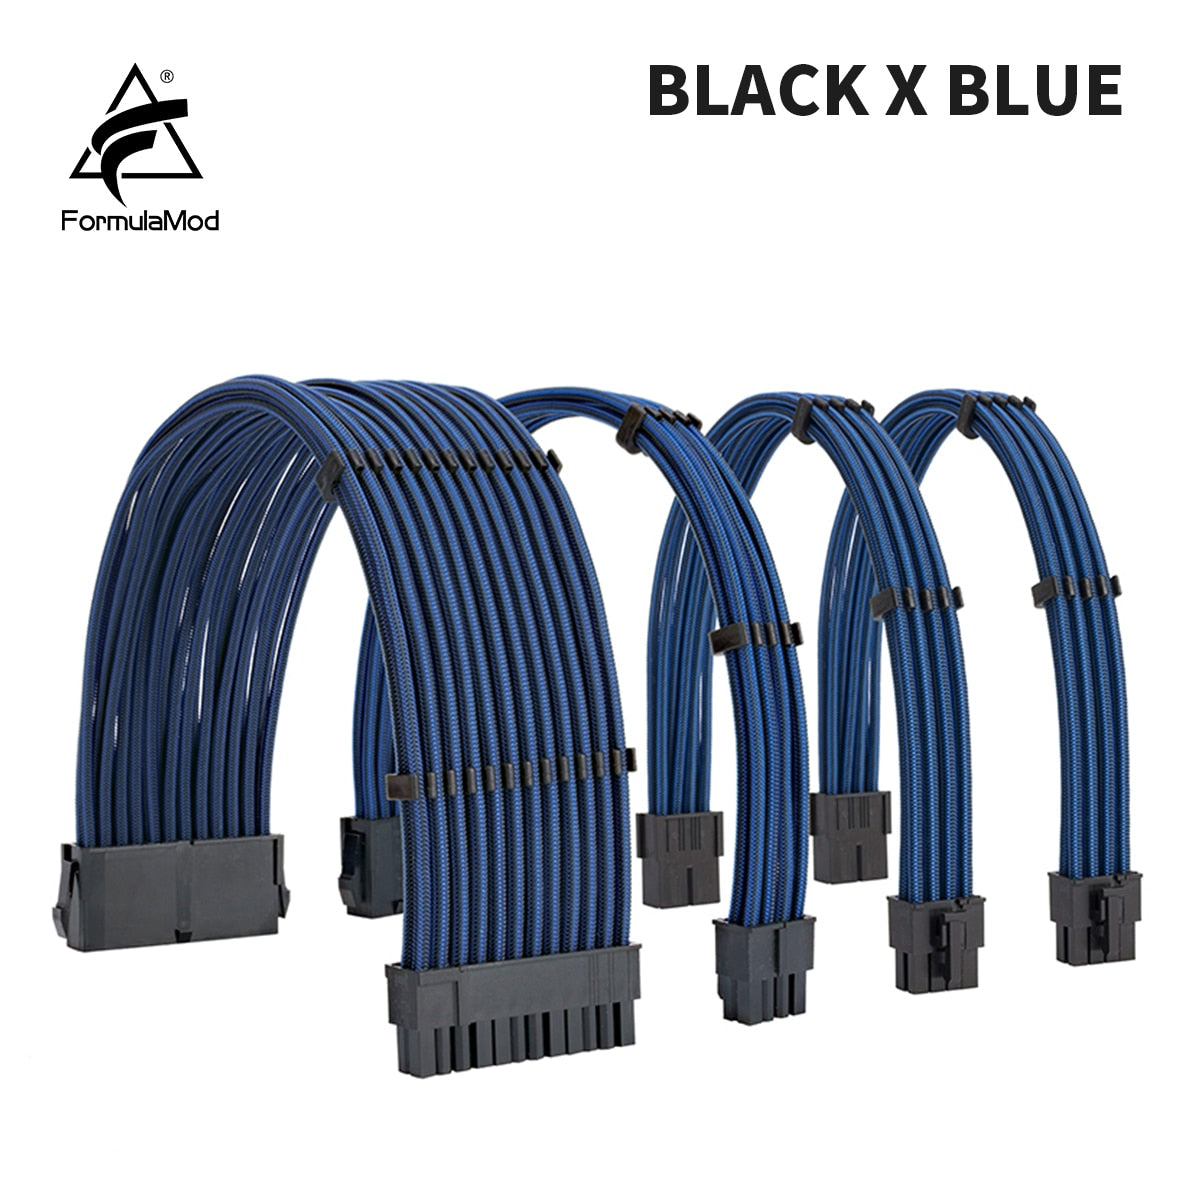 FormulaMod NCK1 Series PSU Extension Cable Kit , Mix Color Cable Solid Combo 300mm ATX24Pin PCI-E8Pin CPU8Pin With Combs